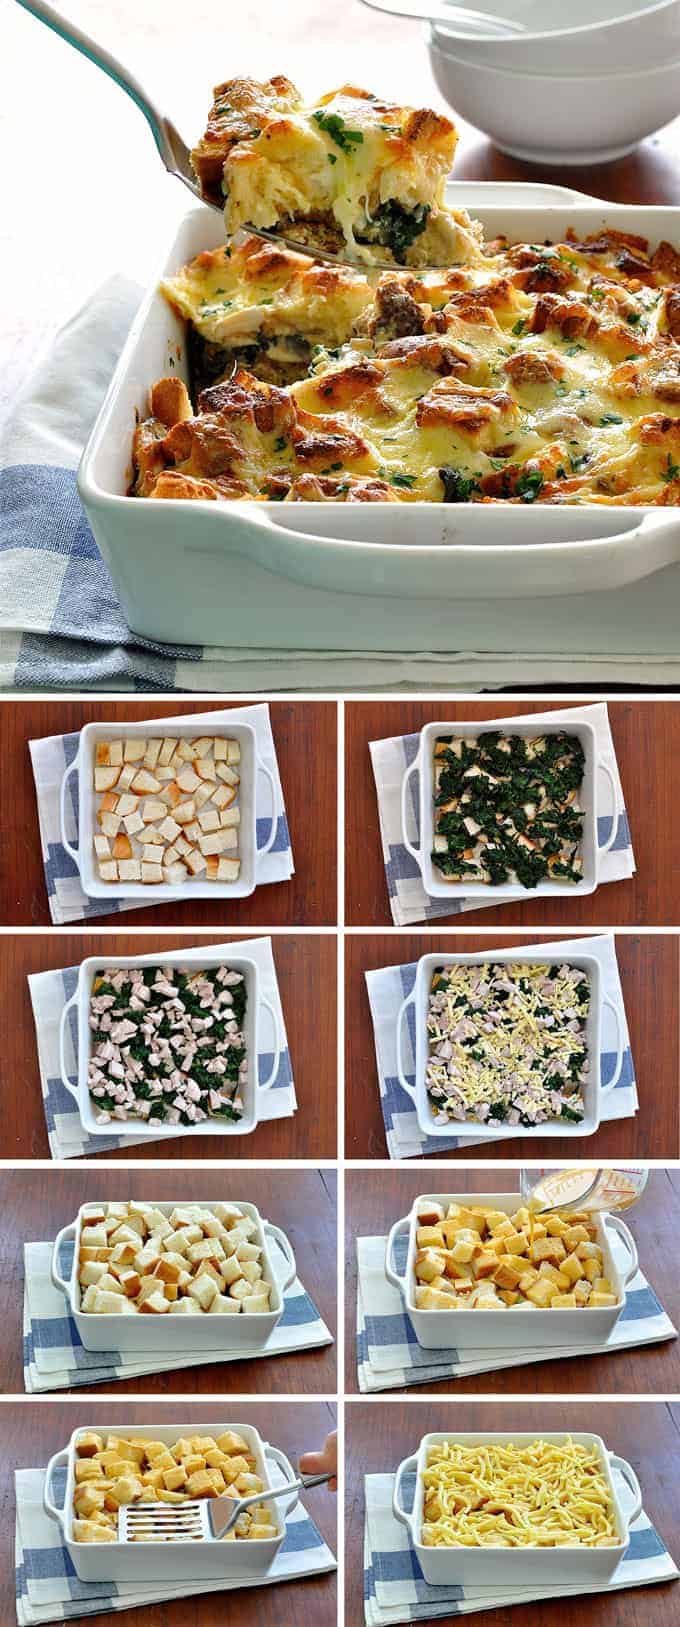 Spooning out Chicken and Spinach Strata, and process photos